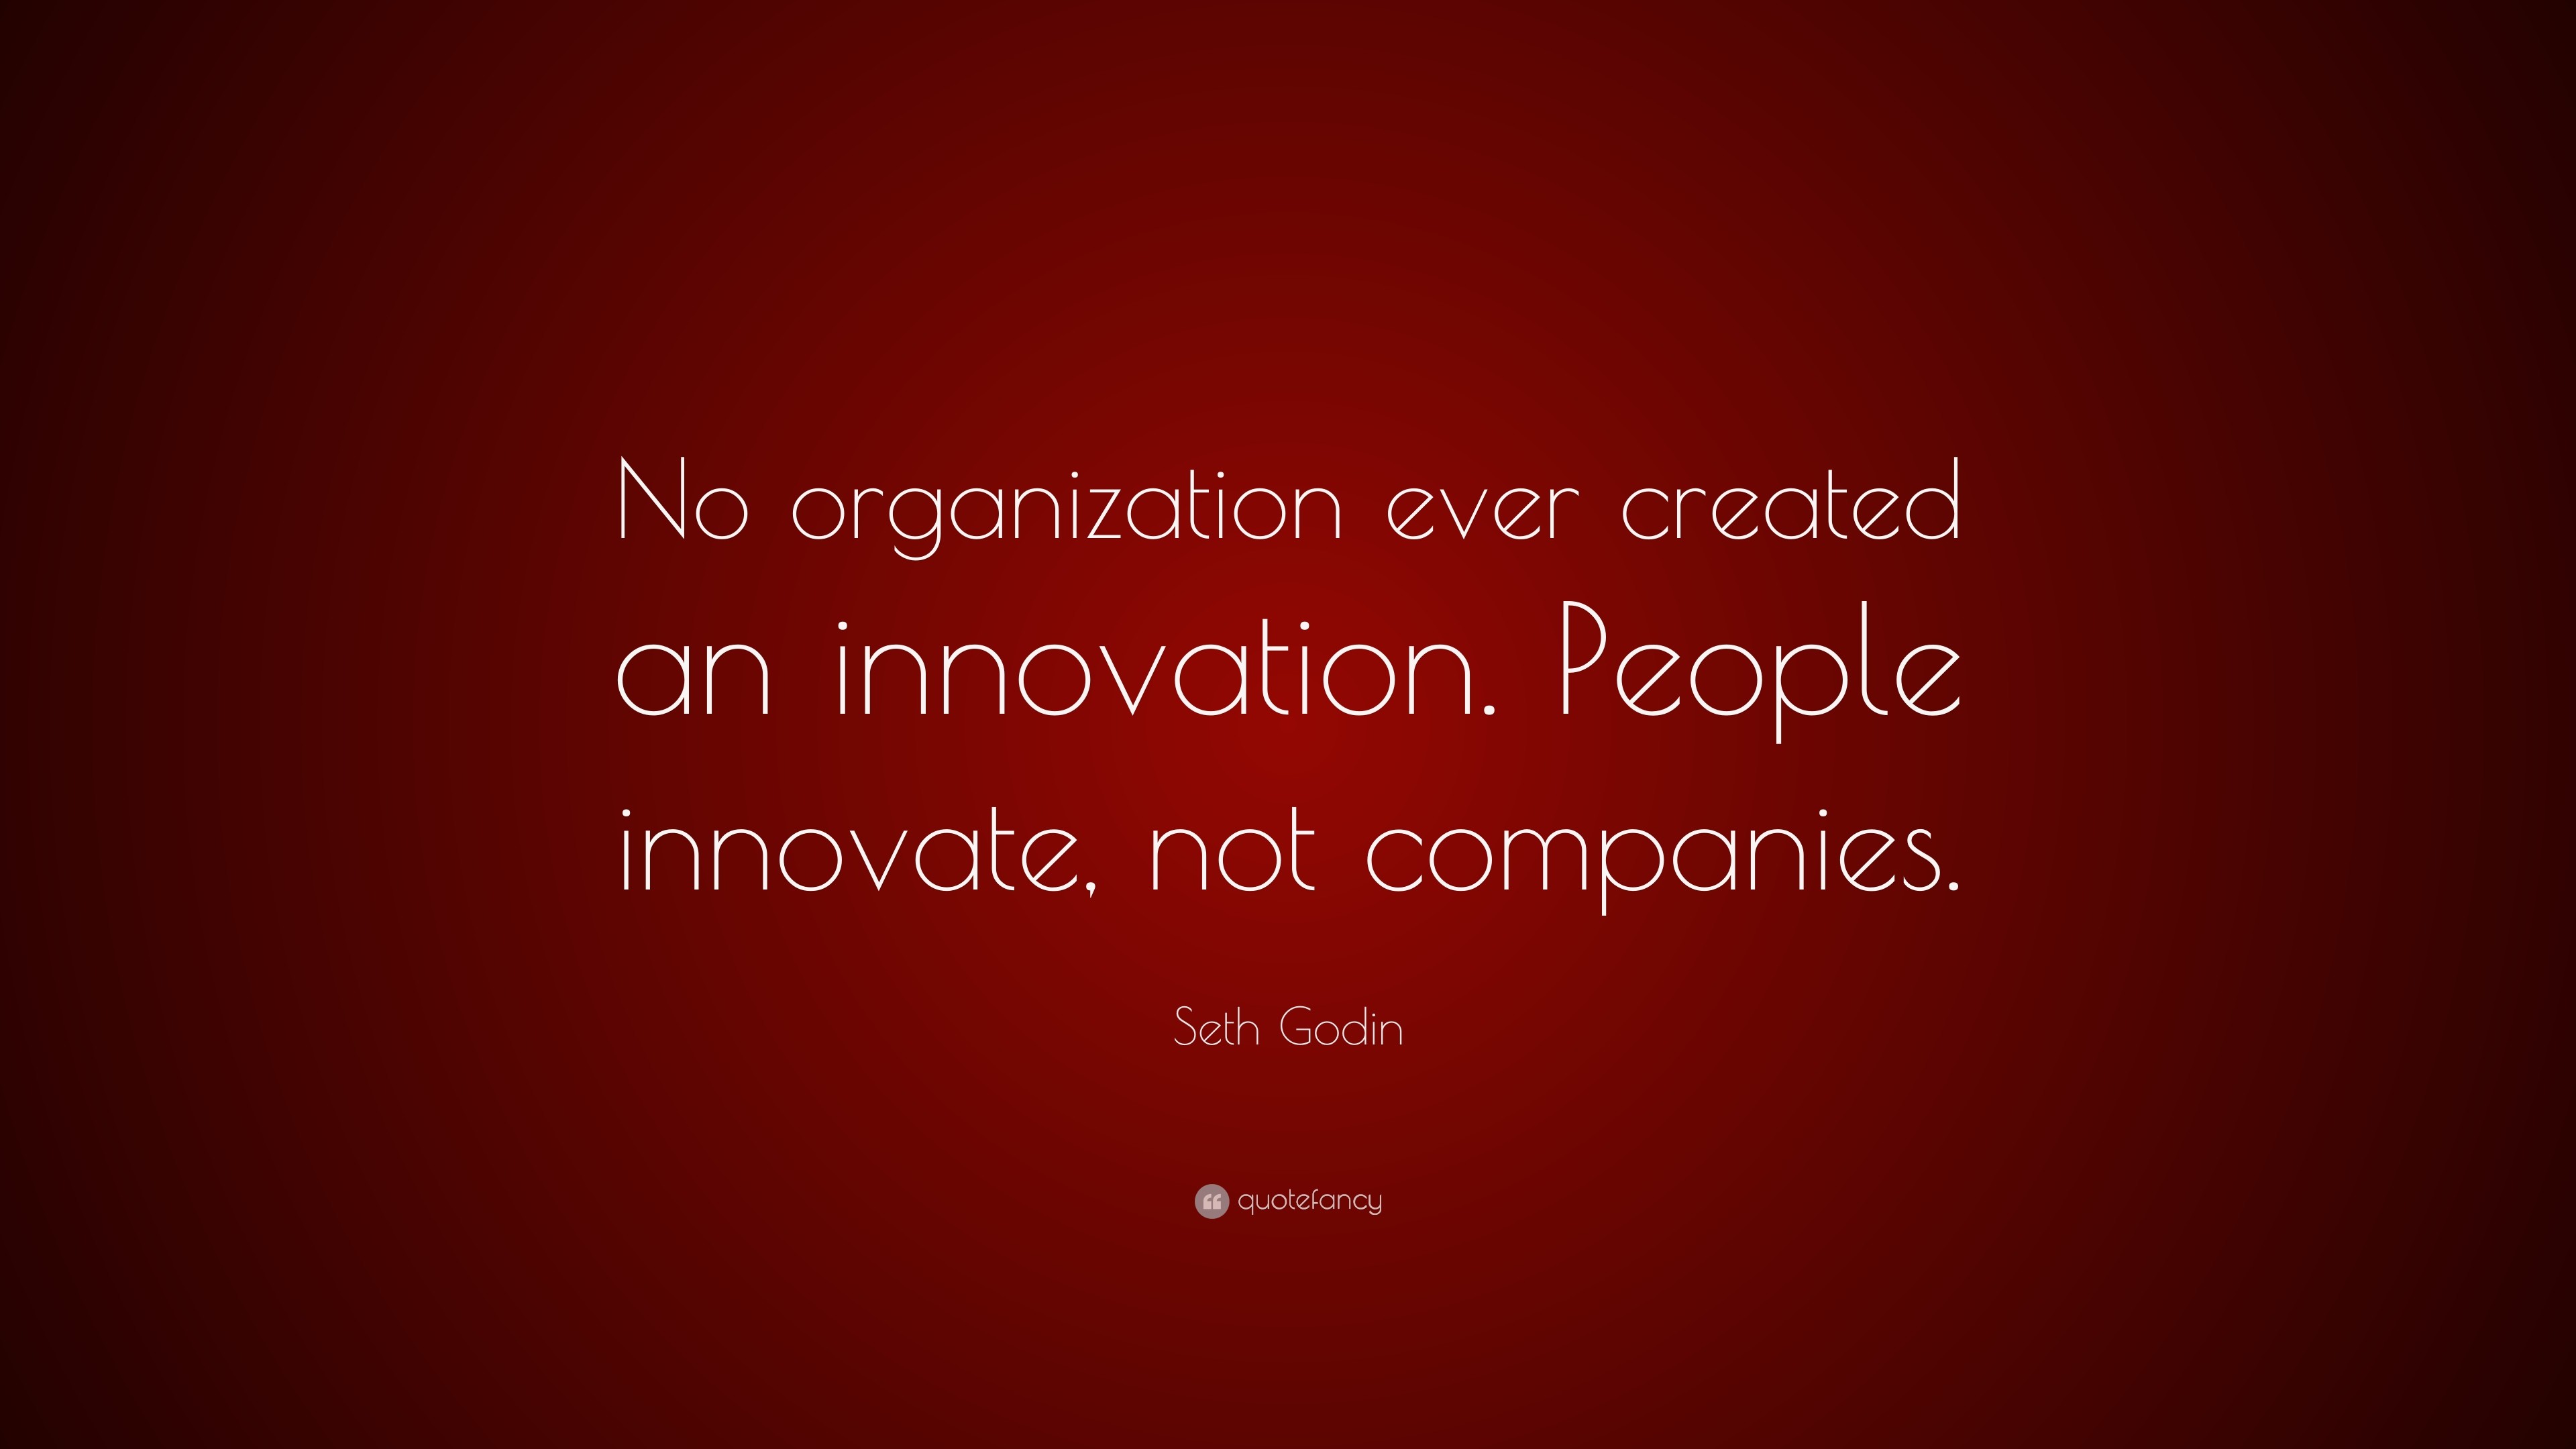 3840x2160 Seth Godin Quote: “No organization ever created an innovation. People  innovate, not